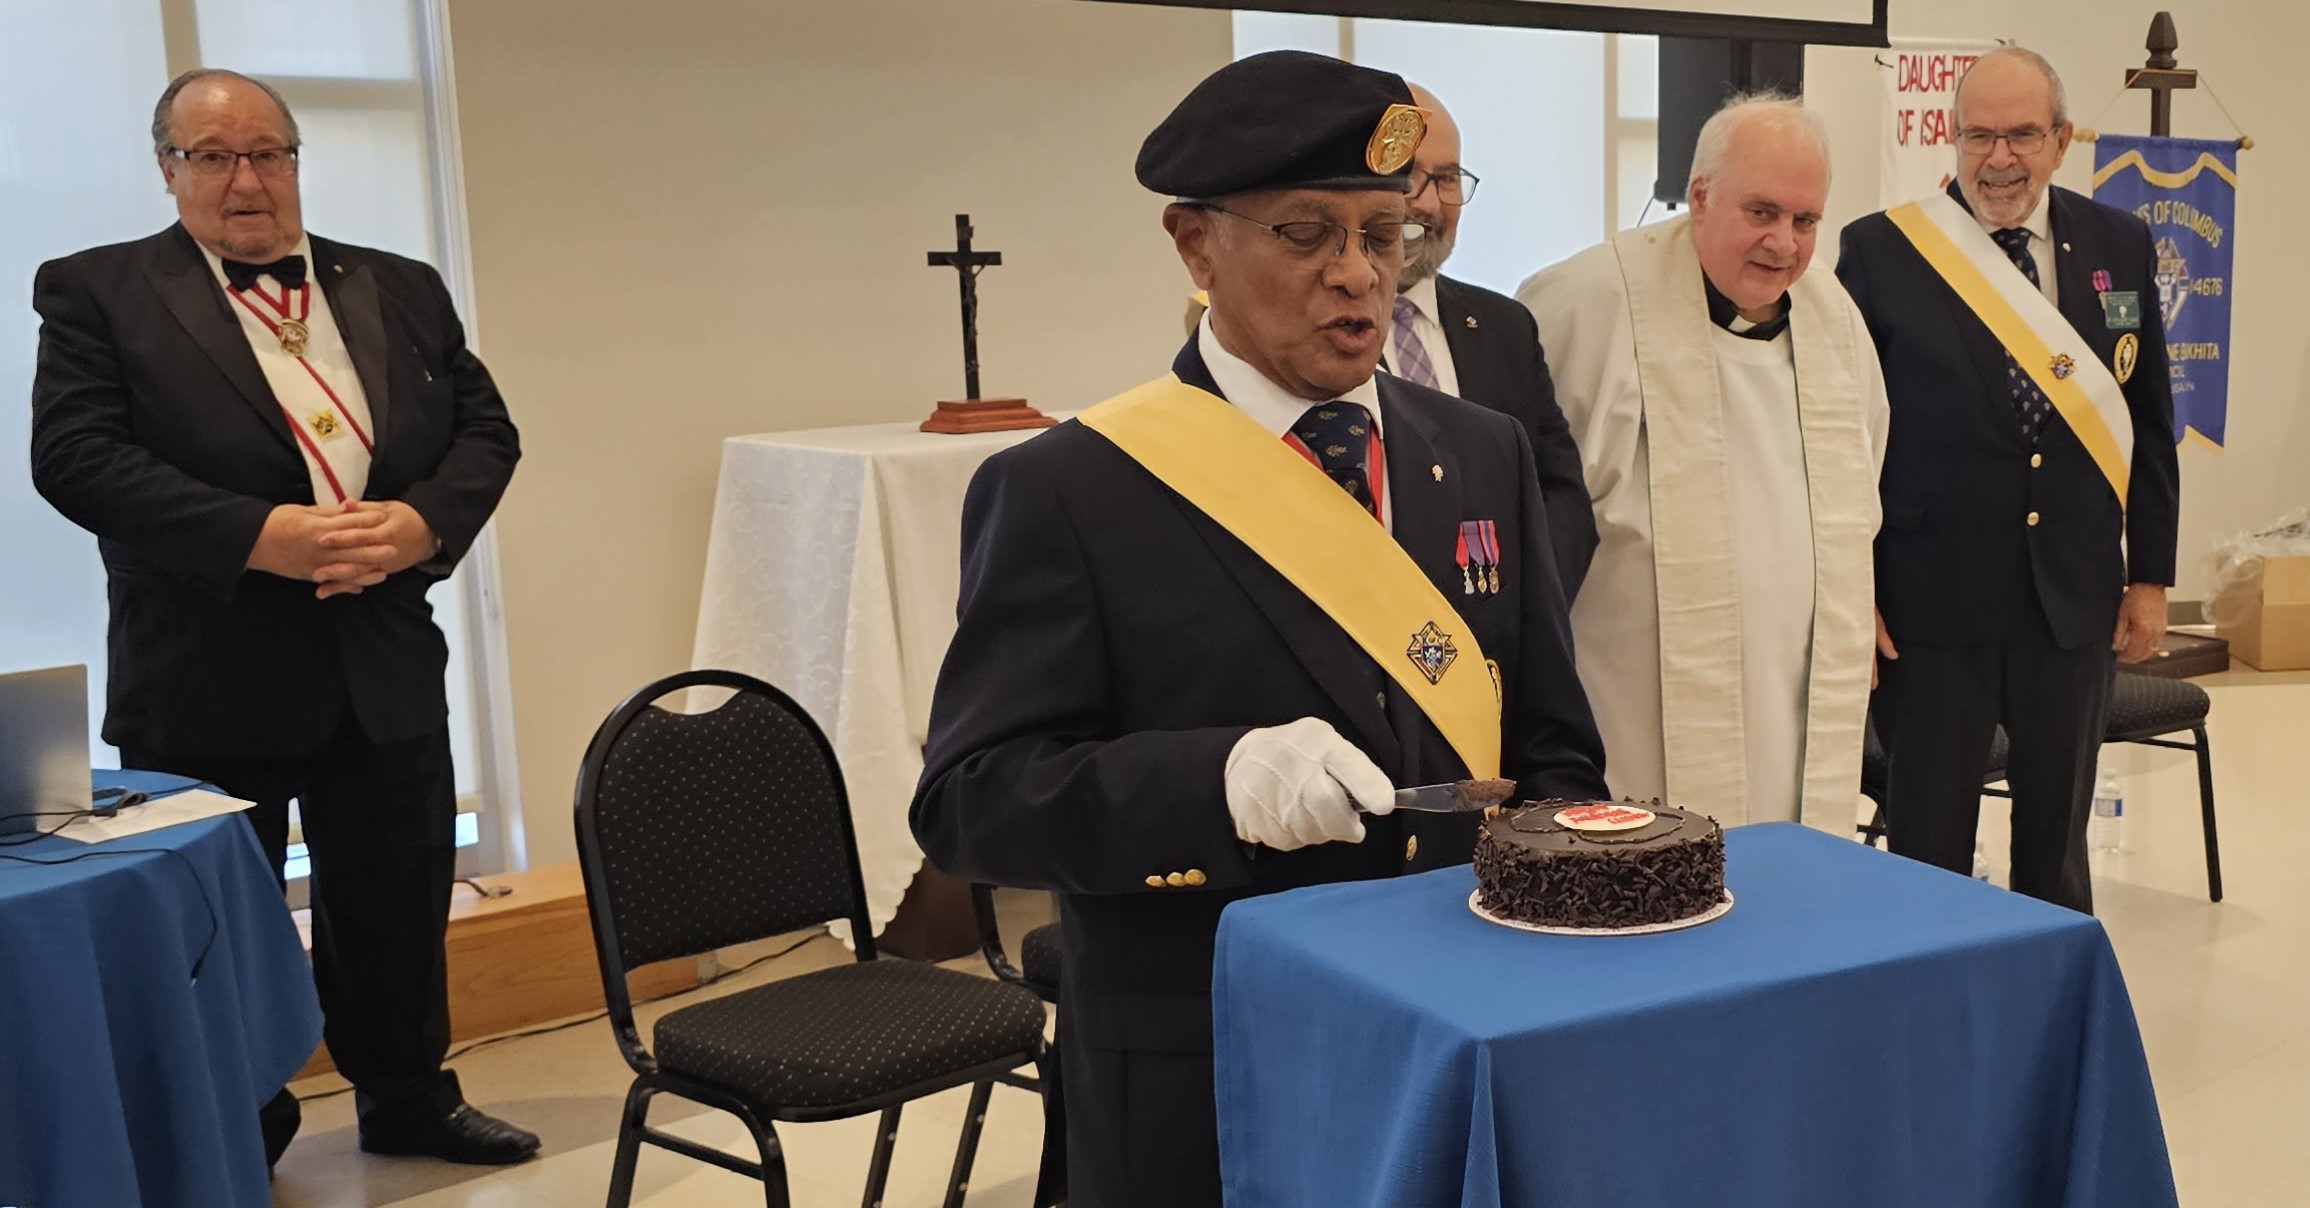 District Master Anthony D'Souza cuts his birthday cake. He eventually gave up trying to cut the cake into 120 slides - one piece for each Sir Knight present during the Fourth Degree Exemplification on November 18, 2023